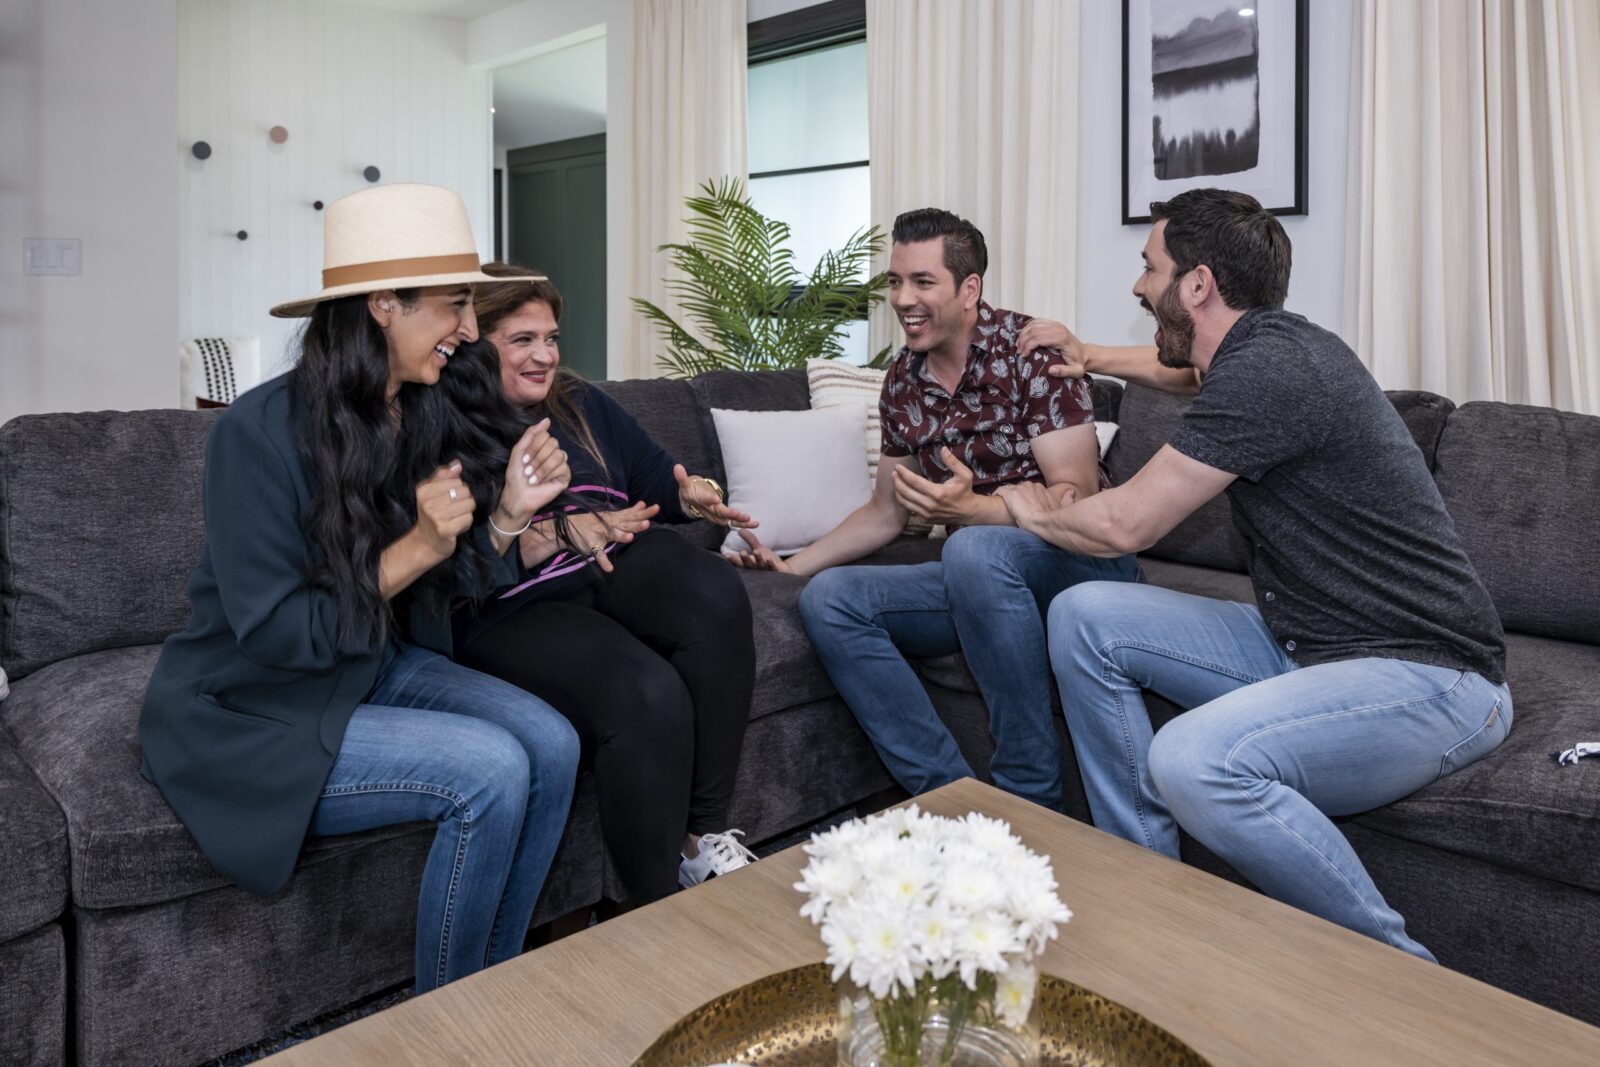 Rooms To Go unveils exclusive collection with Drew & Jonathan™ Scott